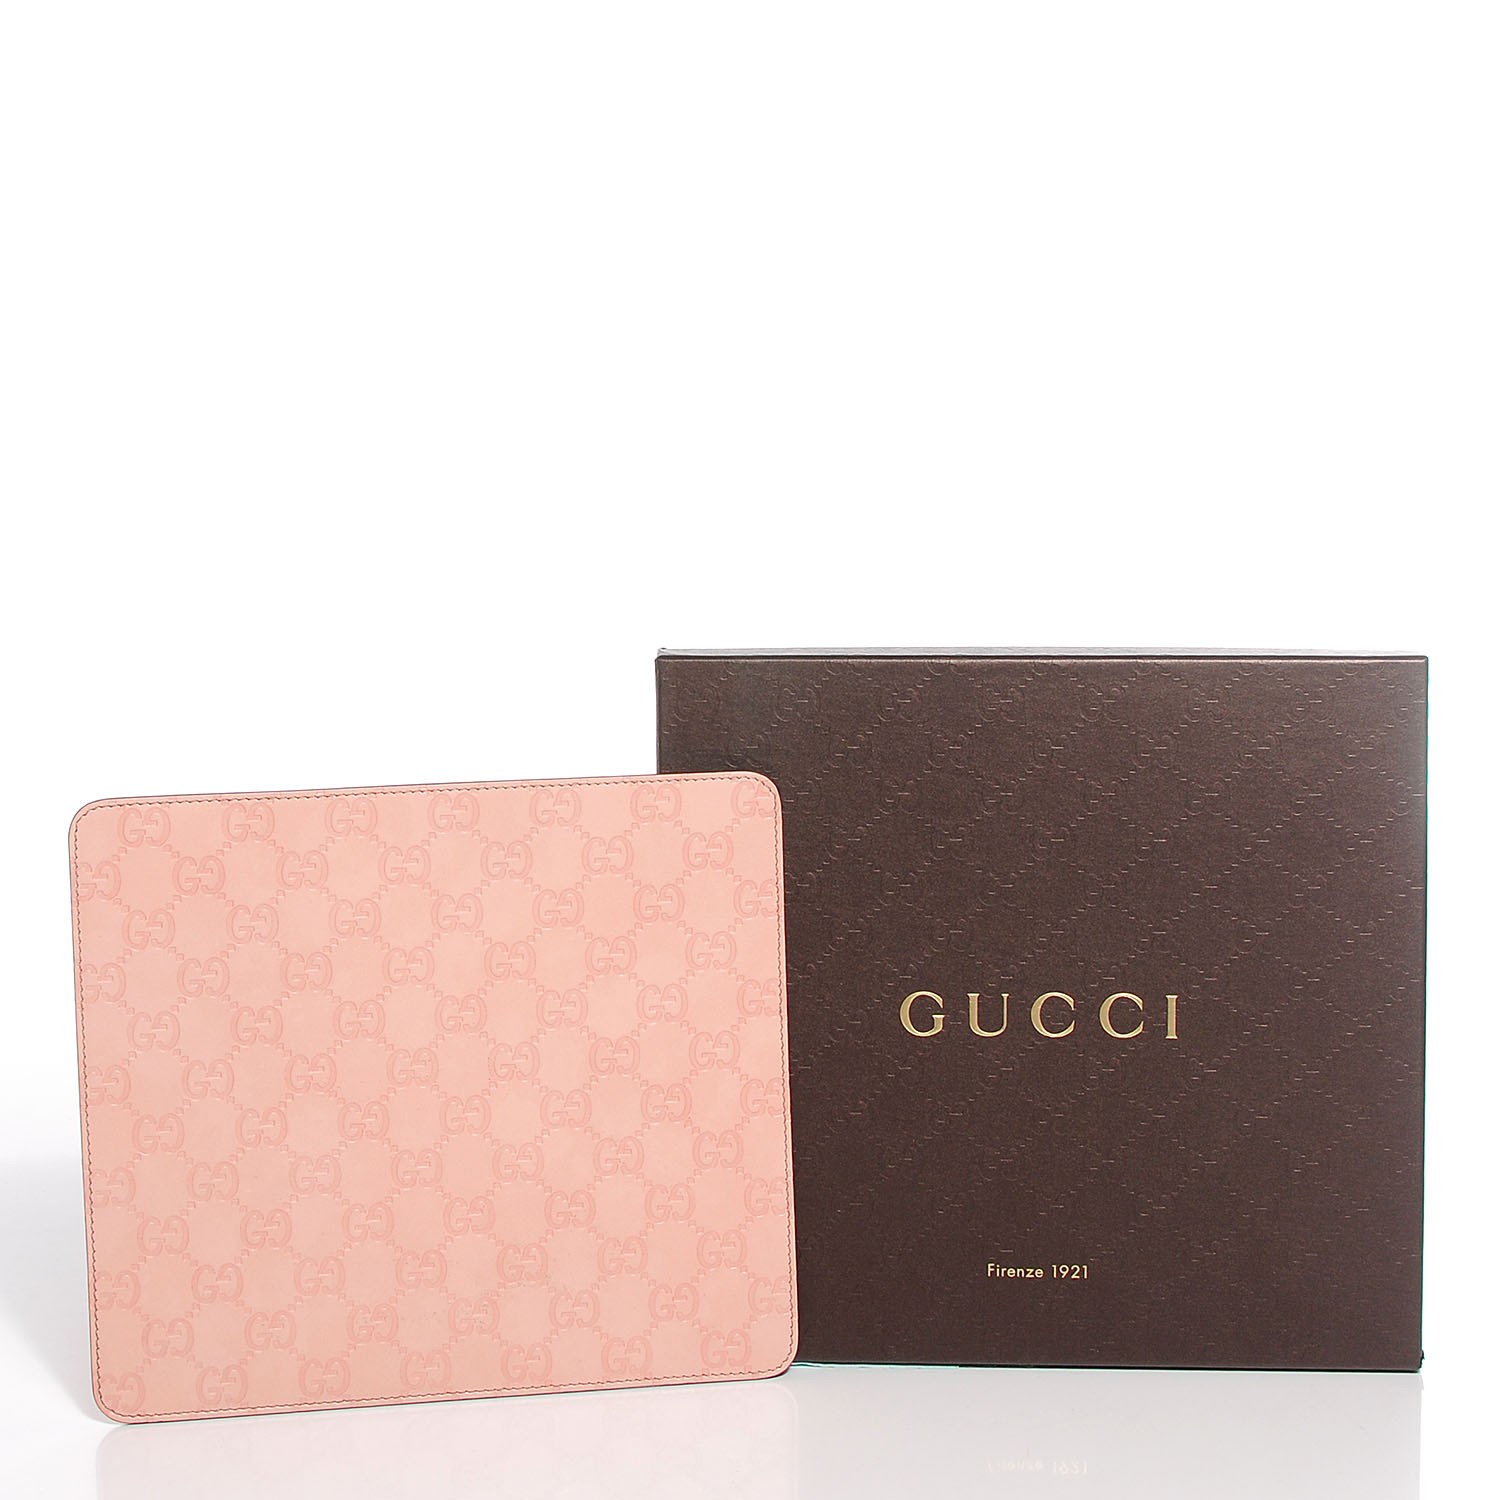 gucci mouse pad